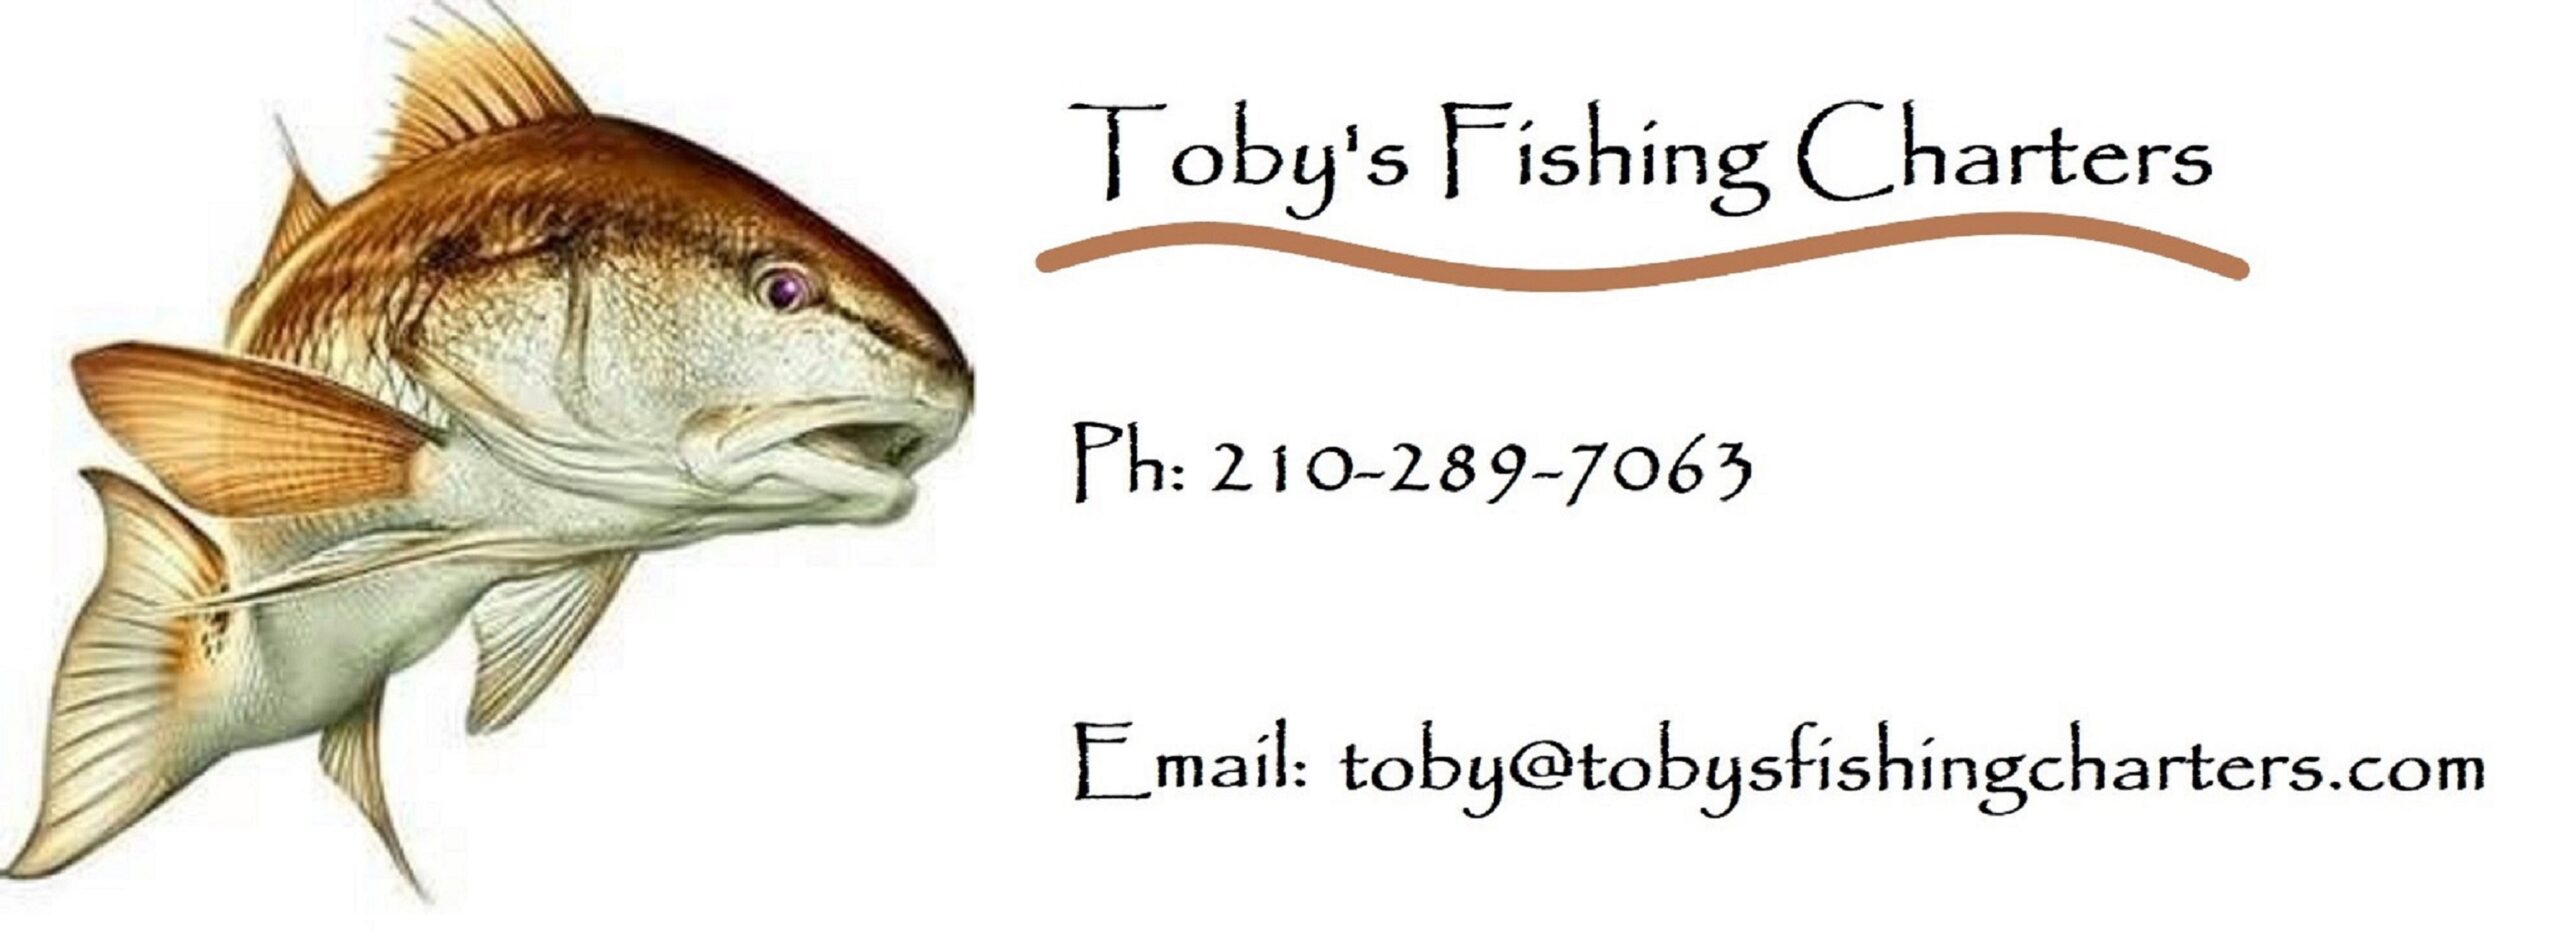 Toby’s Fishing Charters